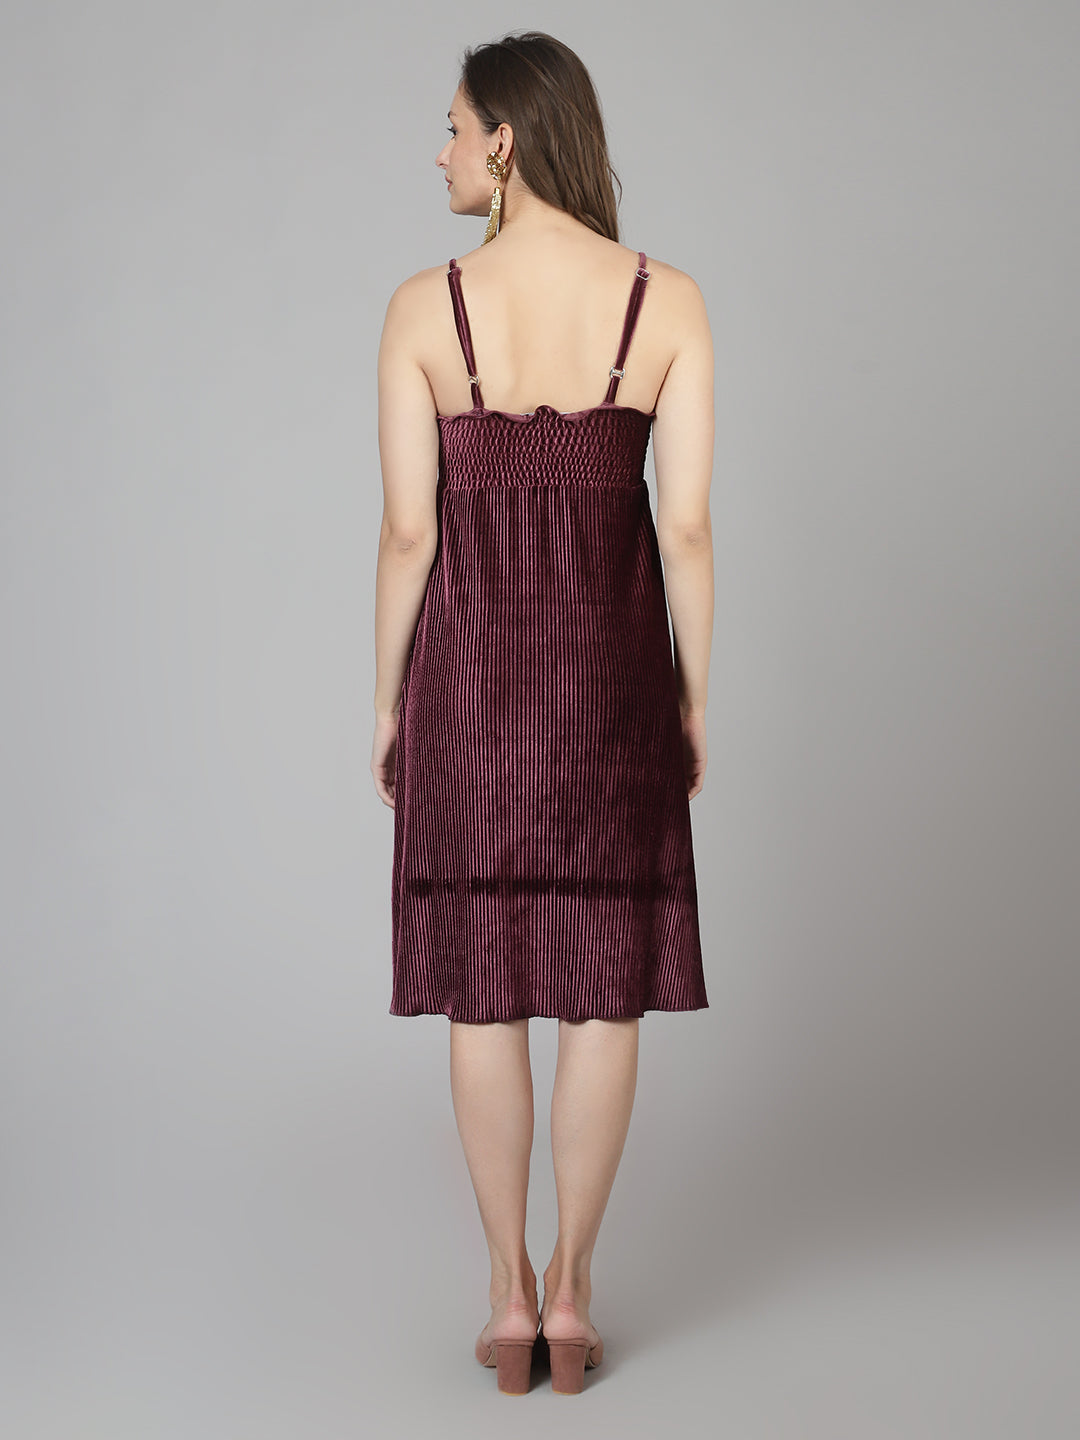 Downtown Party Wine Dress